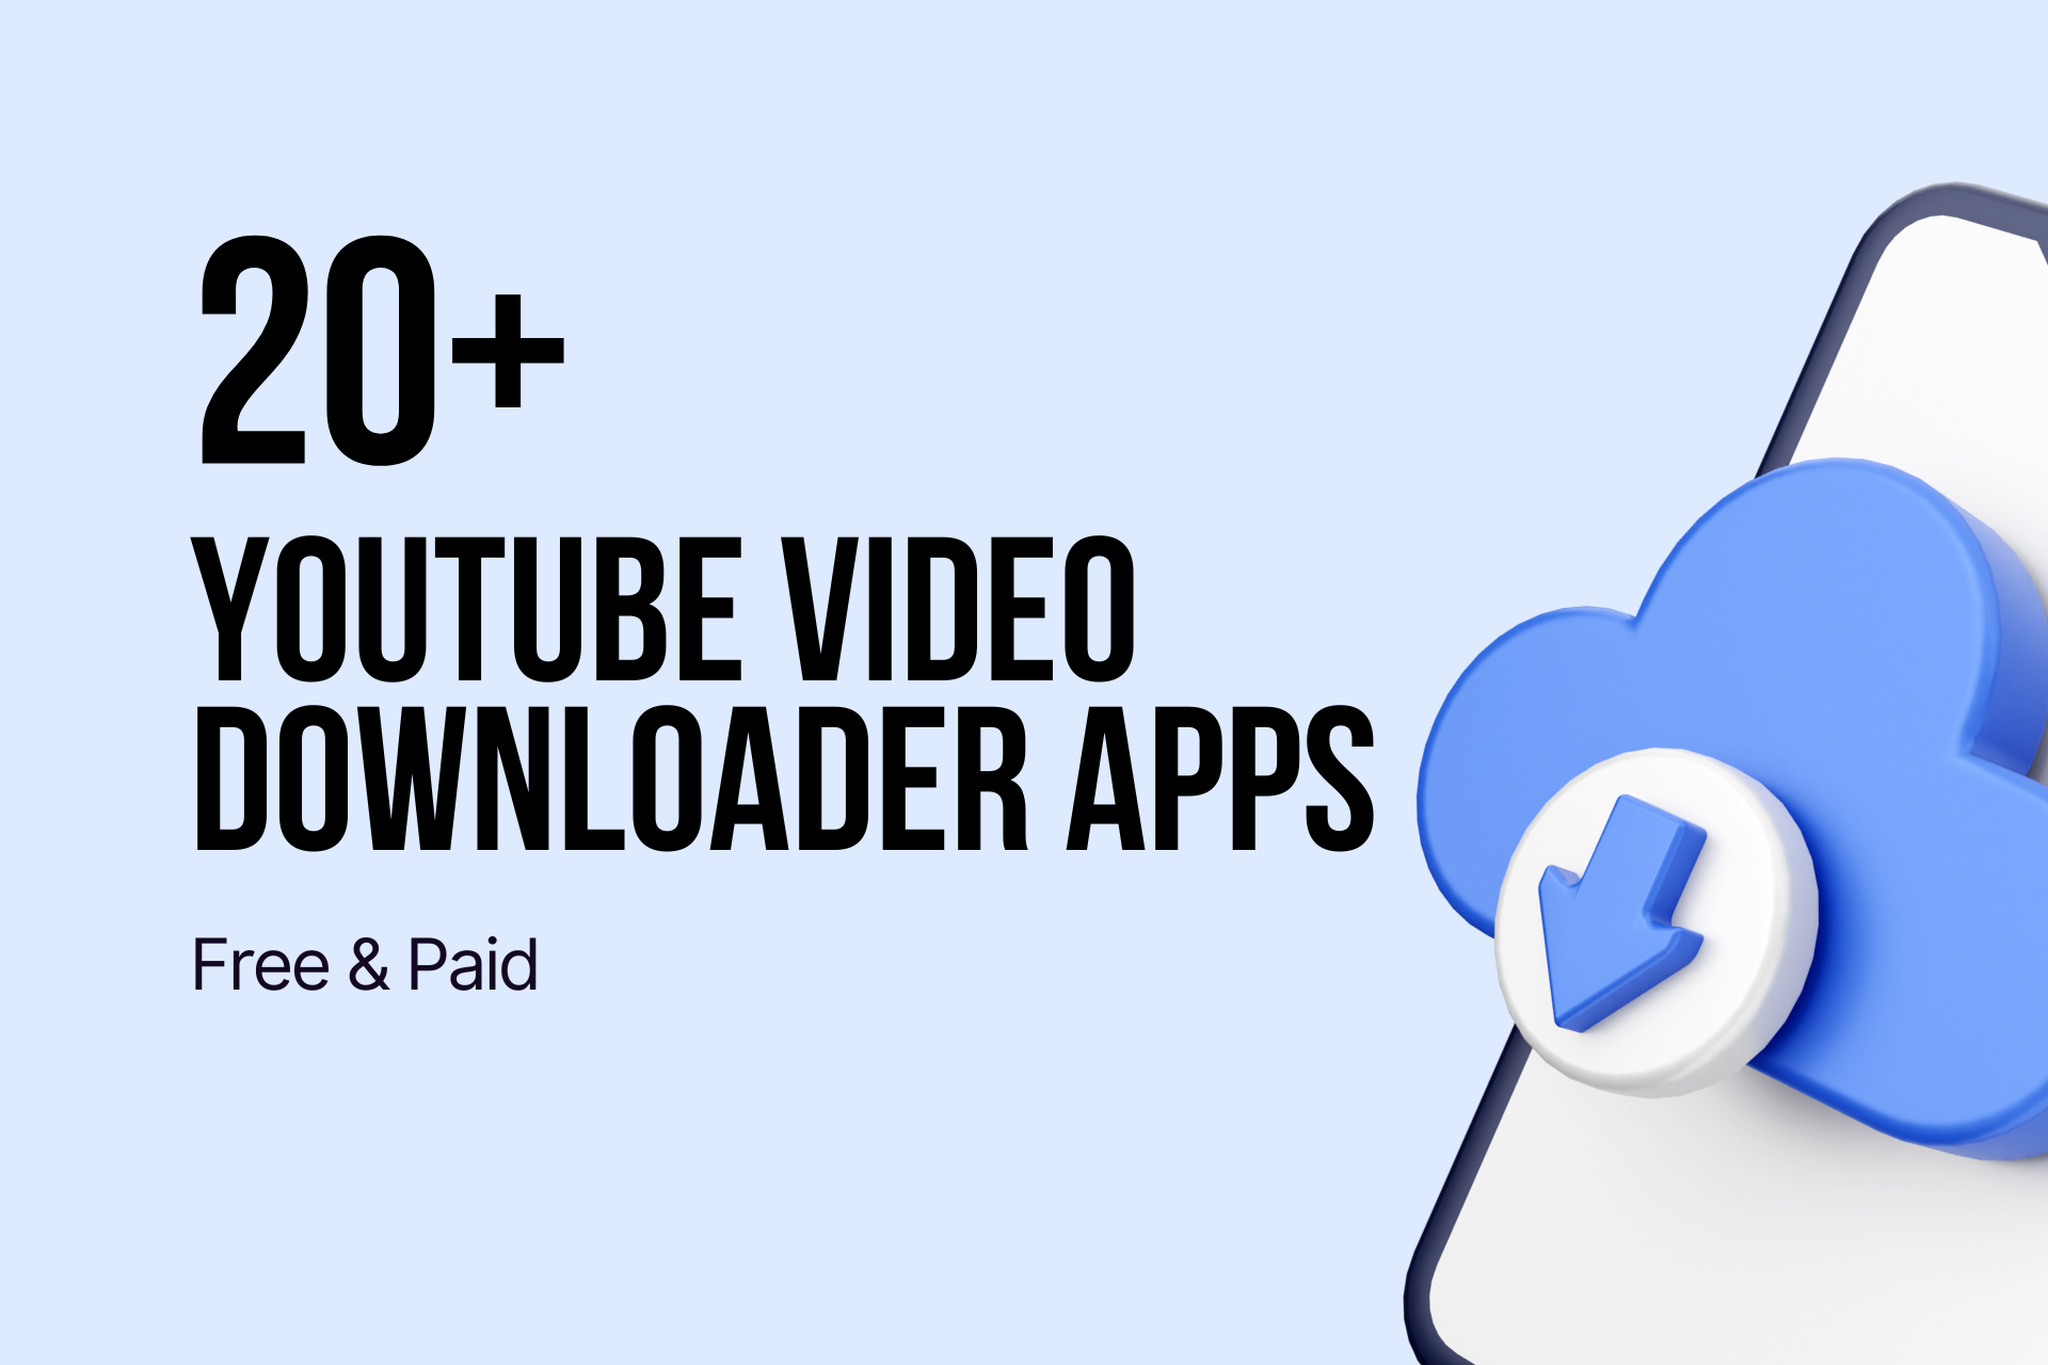 20+ YouTube Video Downloader Apps (Free & Paid)